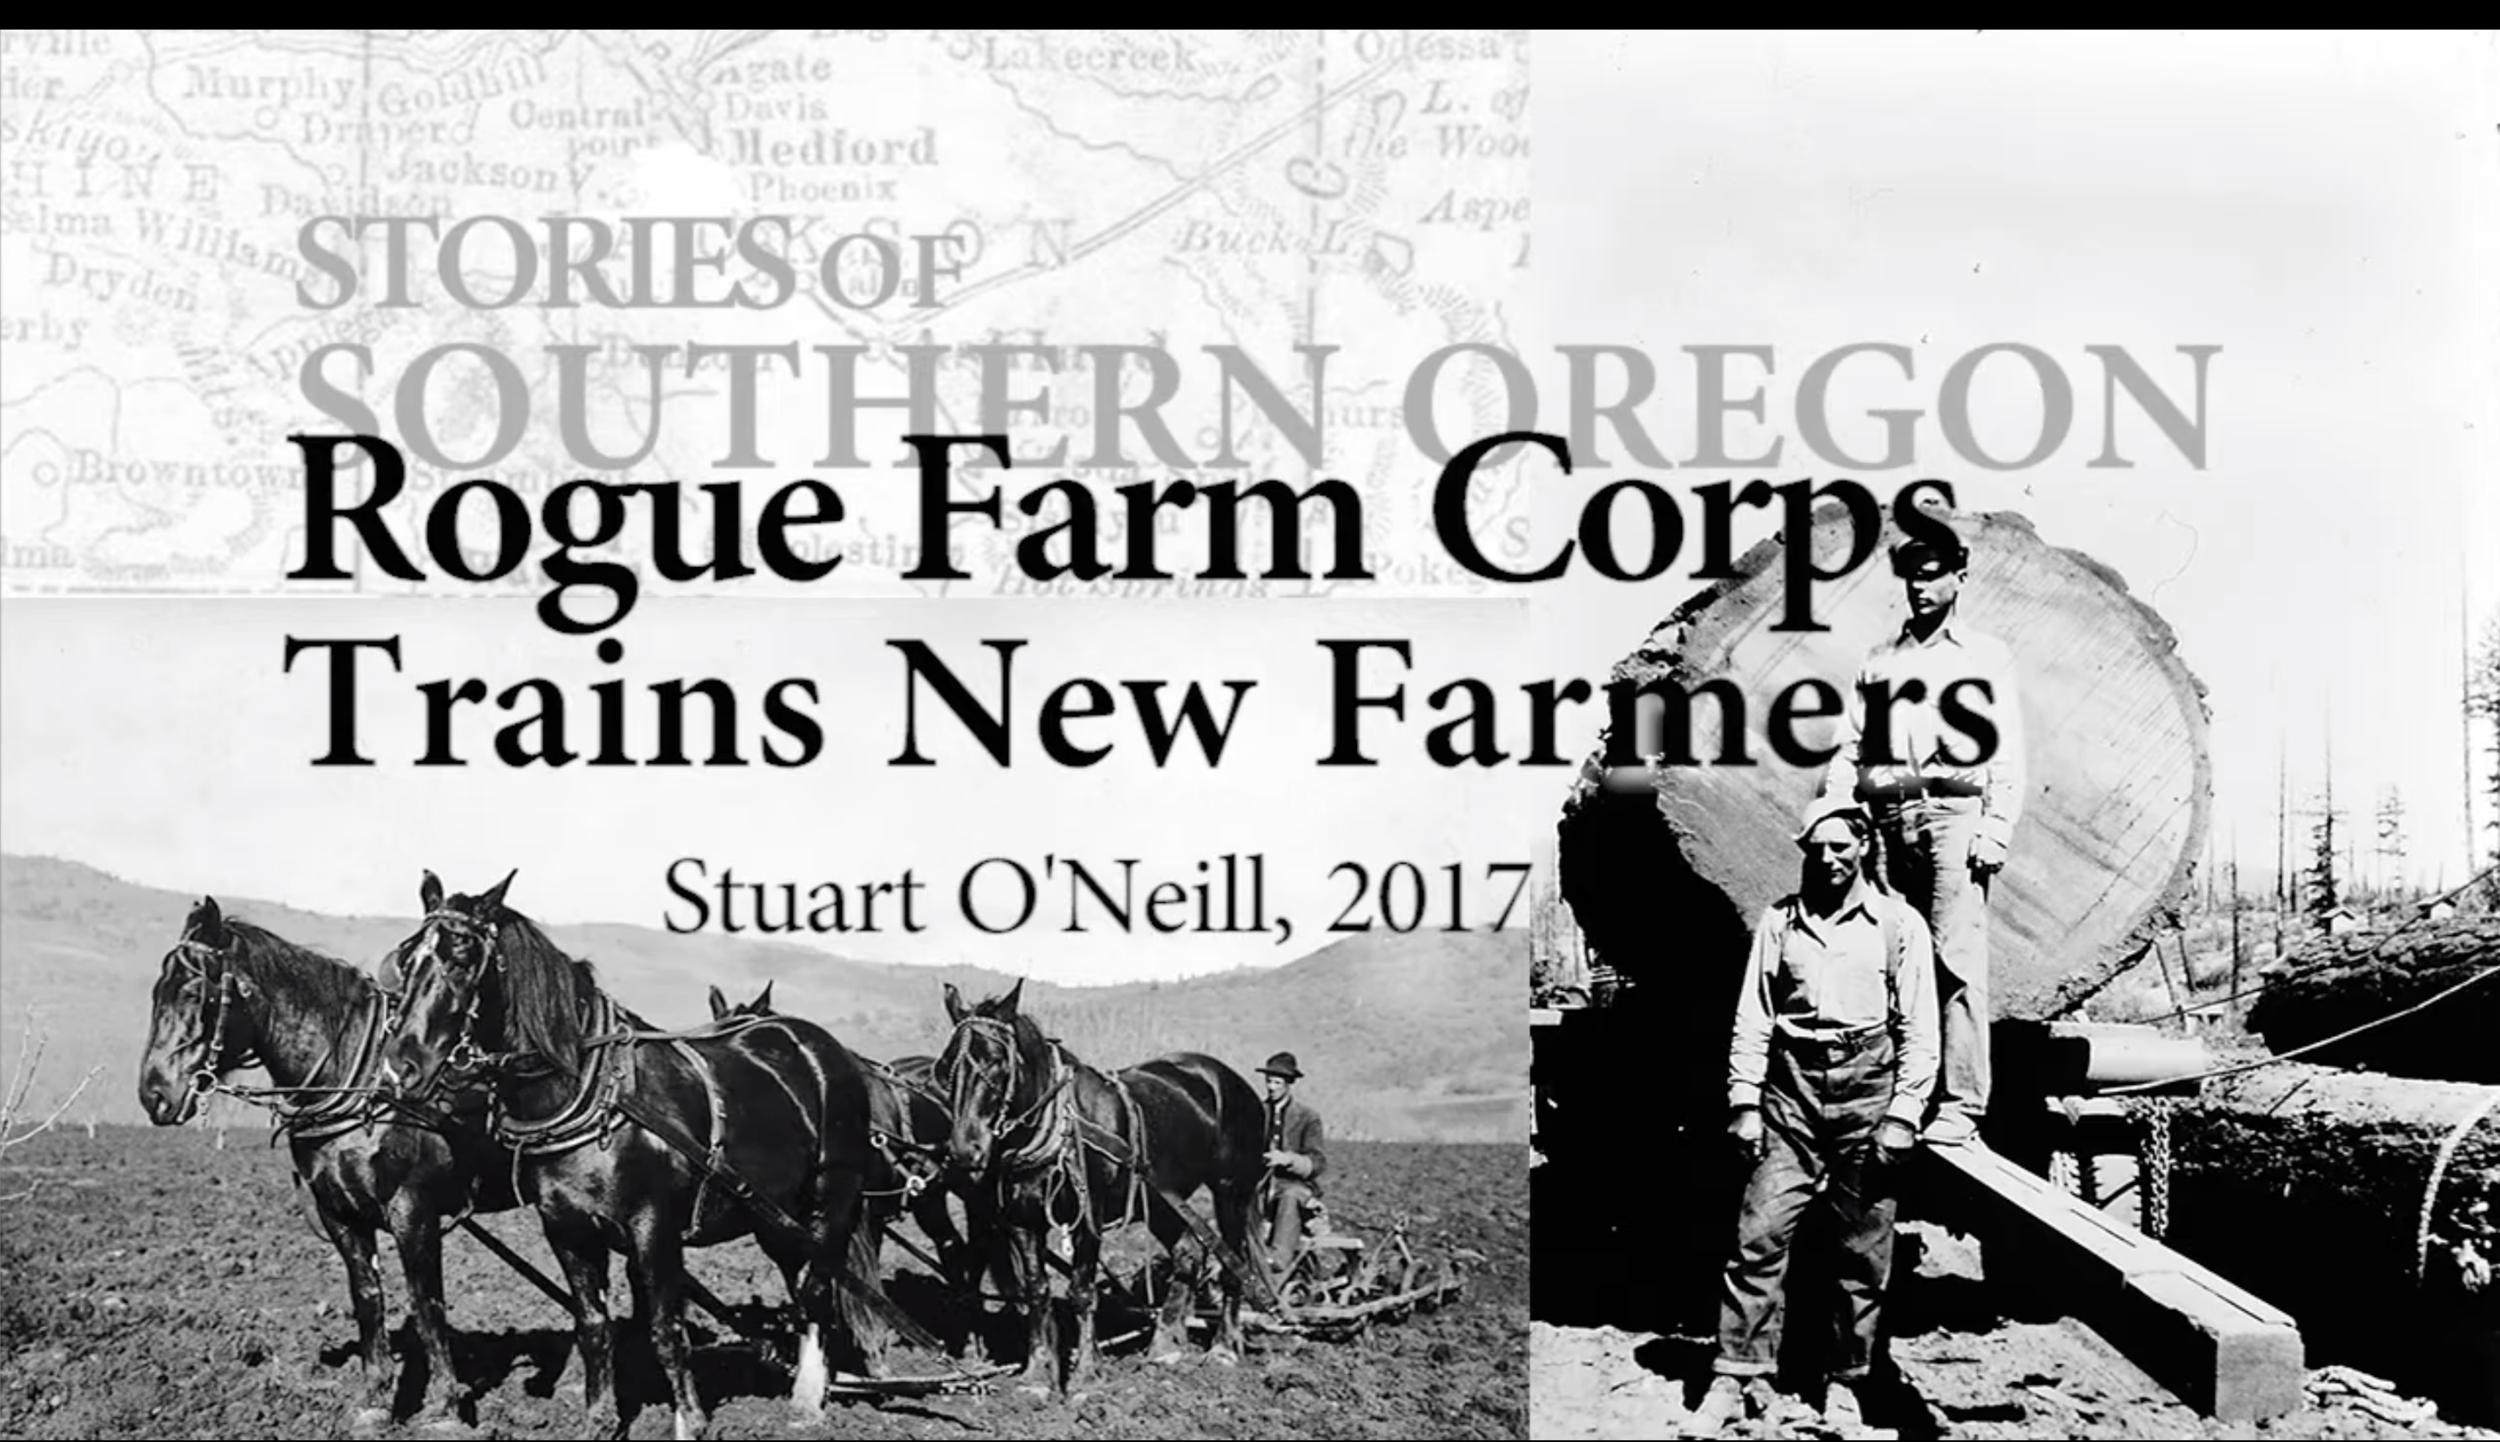  Stories of Southern Oregon: Training New Farmers